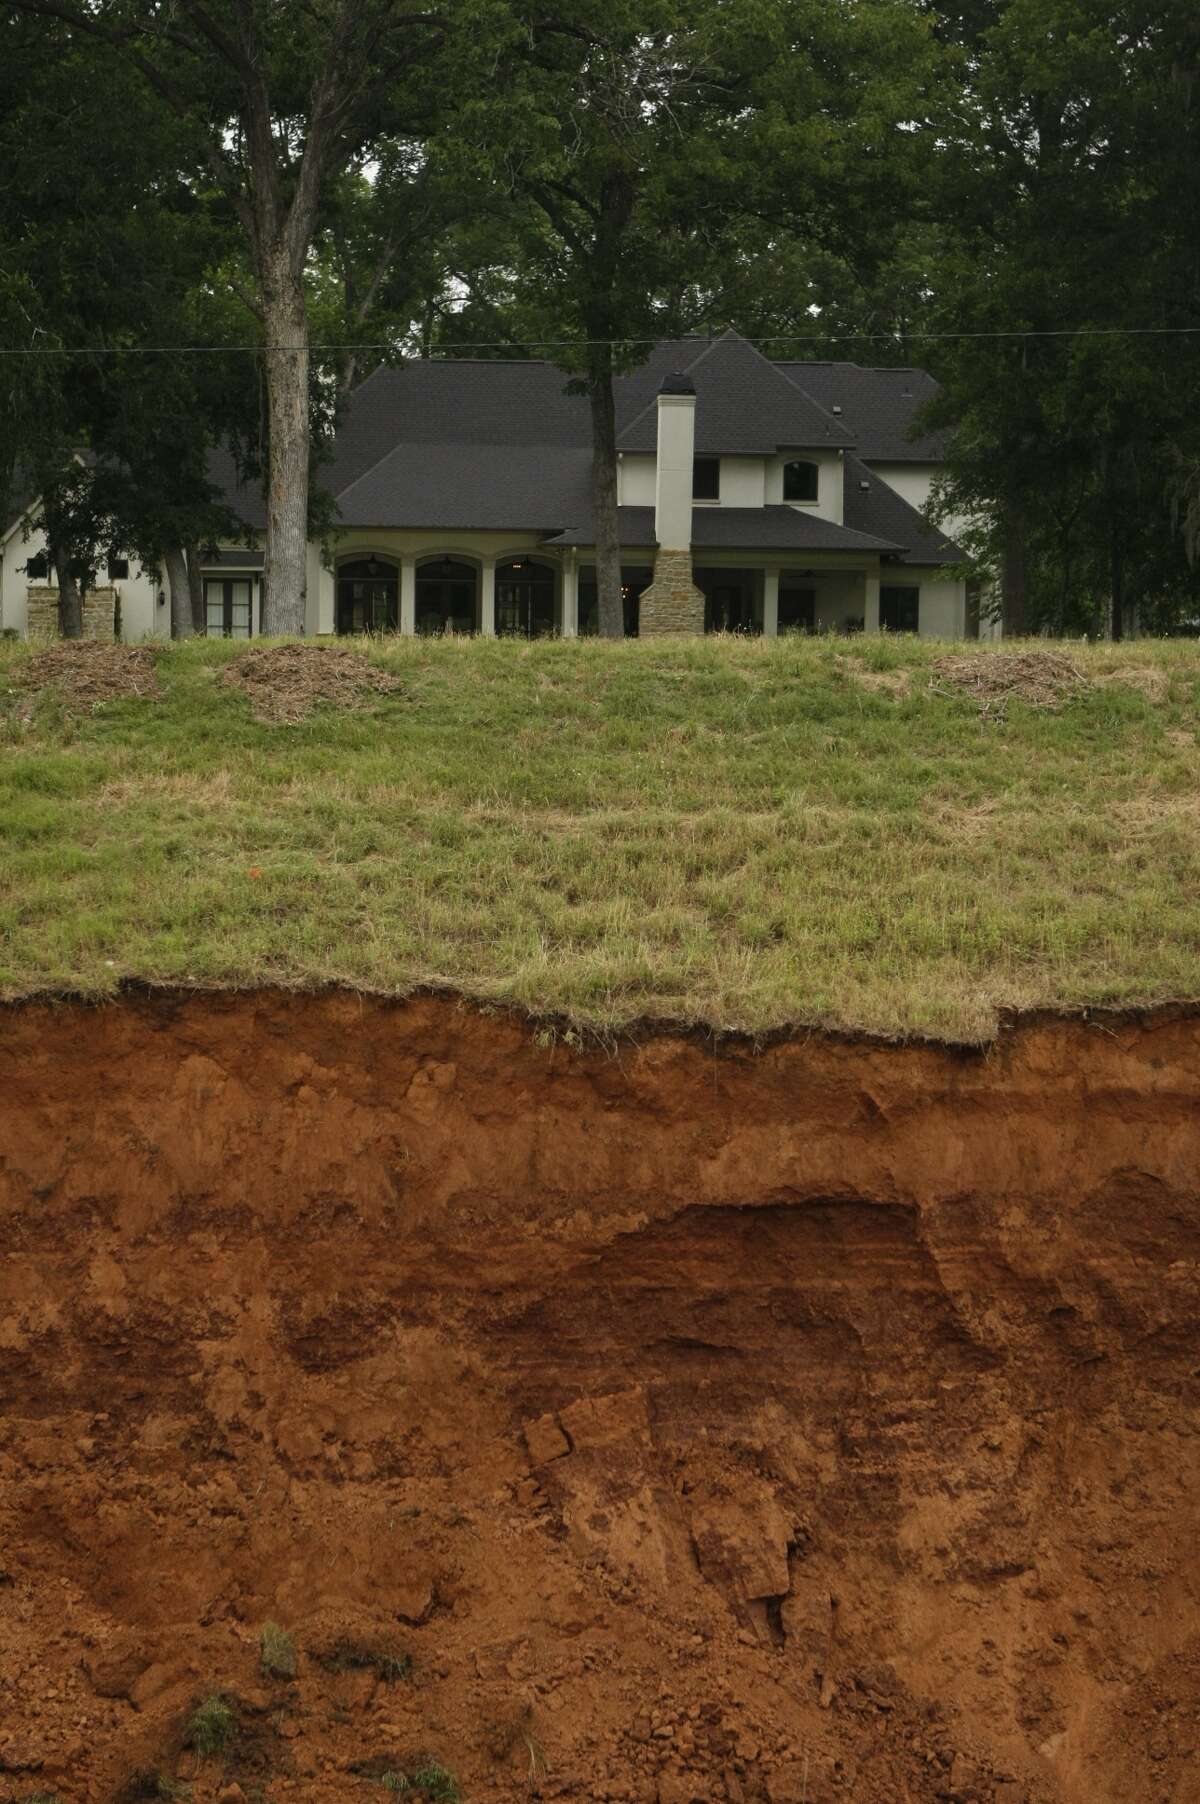 Residents in the Richmond area are increasingly worried about a drainage ditch near their homes that has been eroding and expanding into a gorge off River Forest Drive near FM 359.